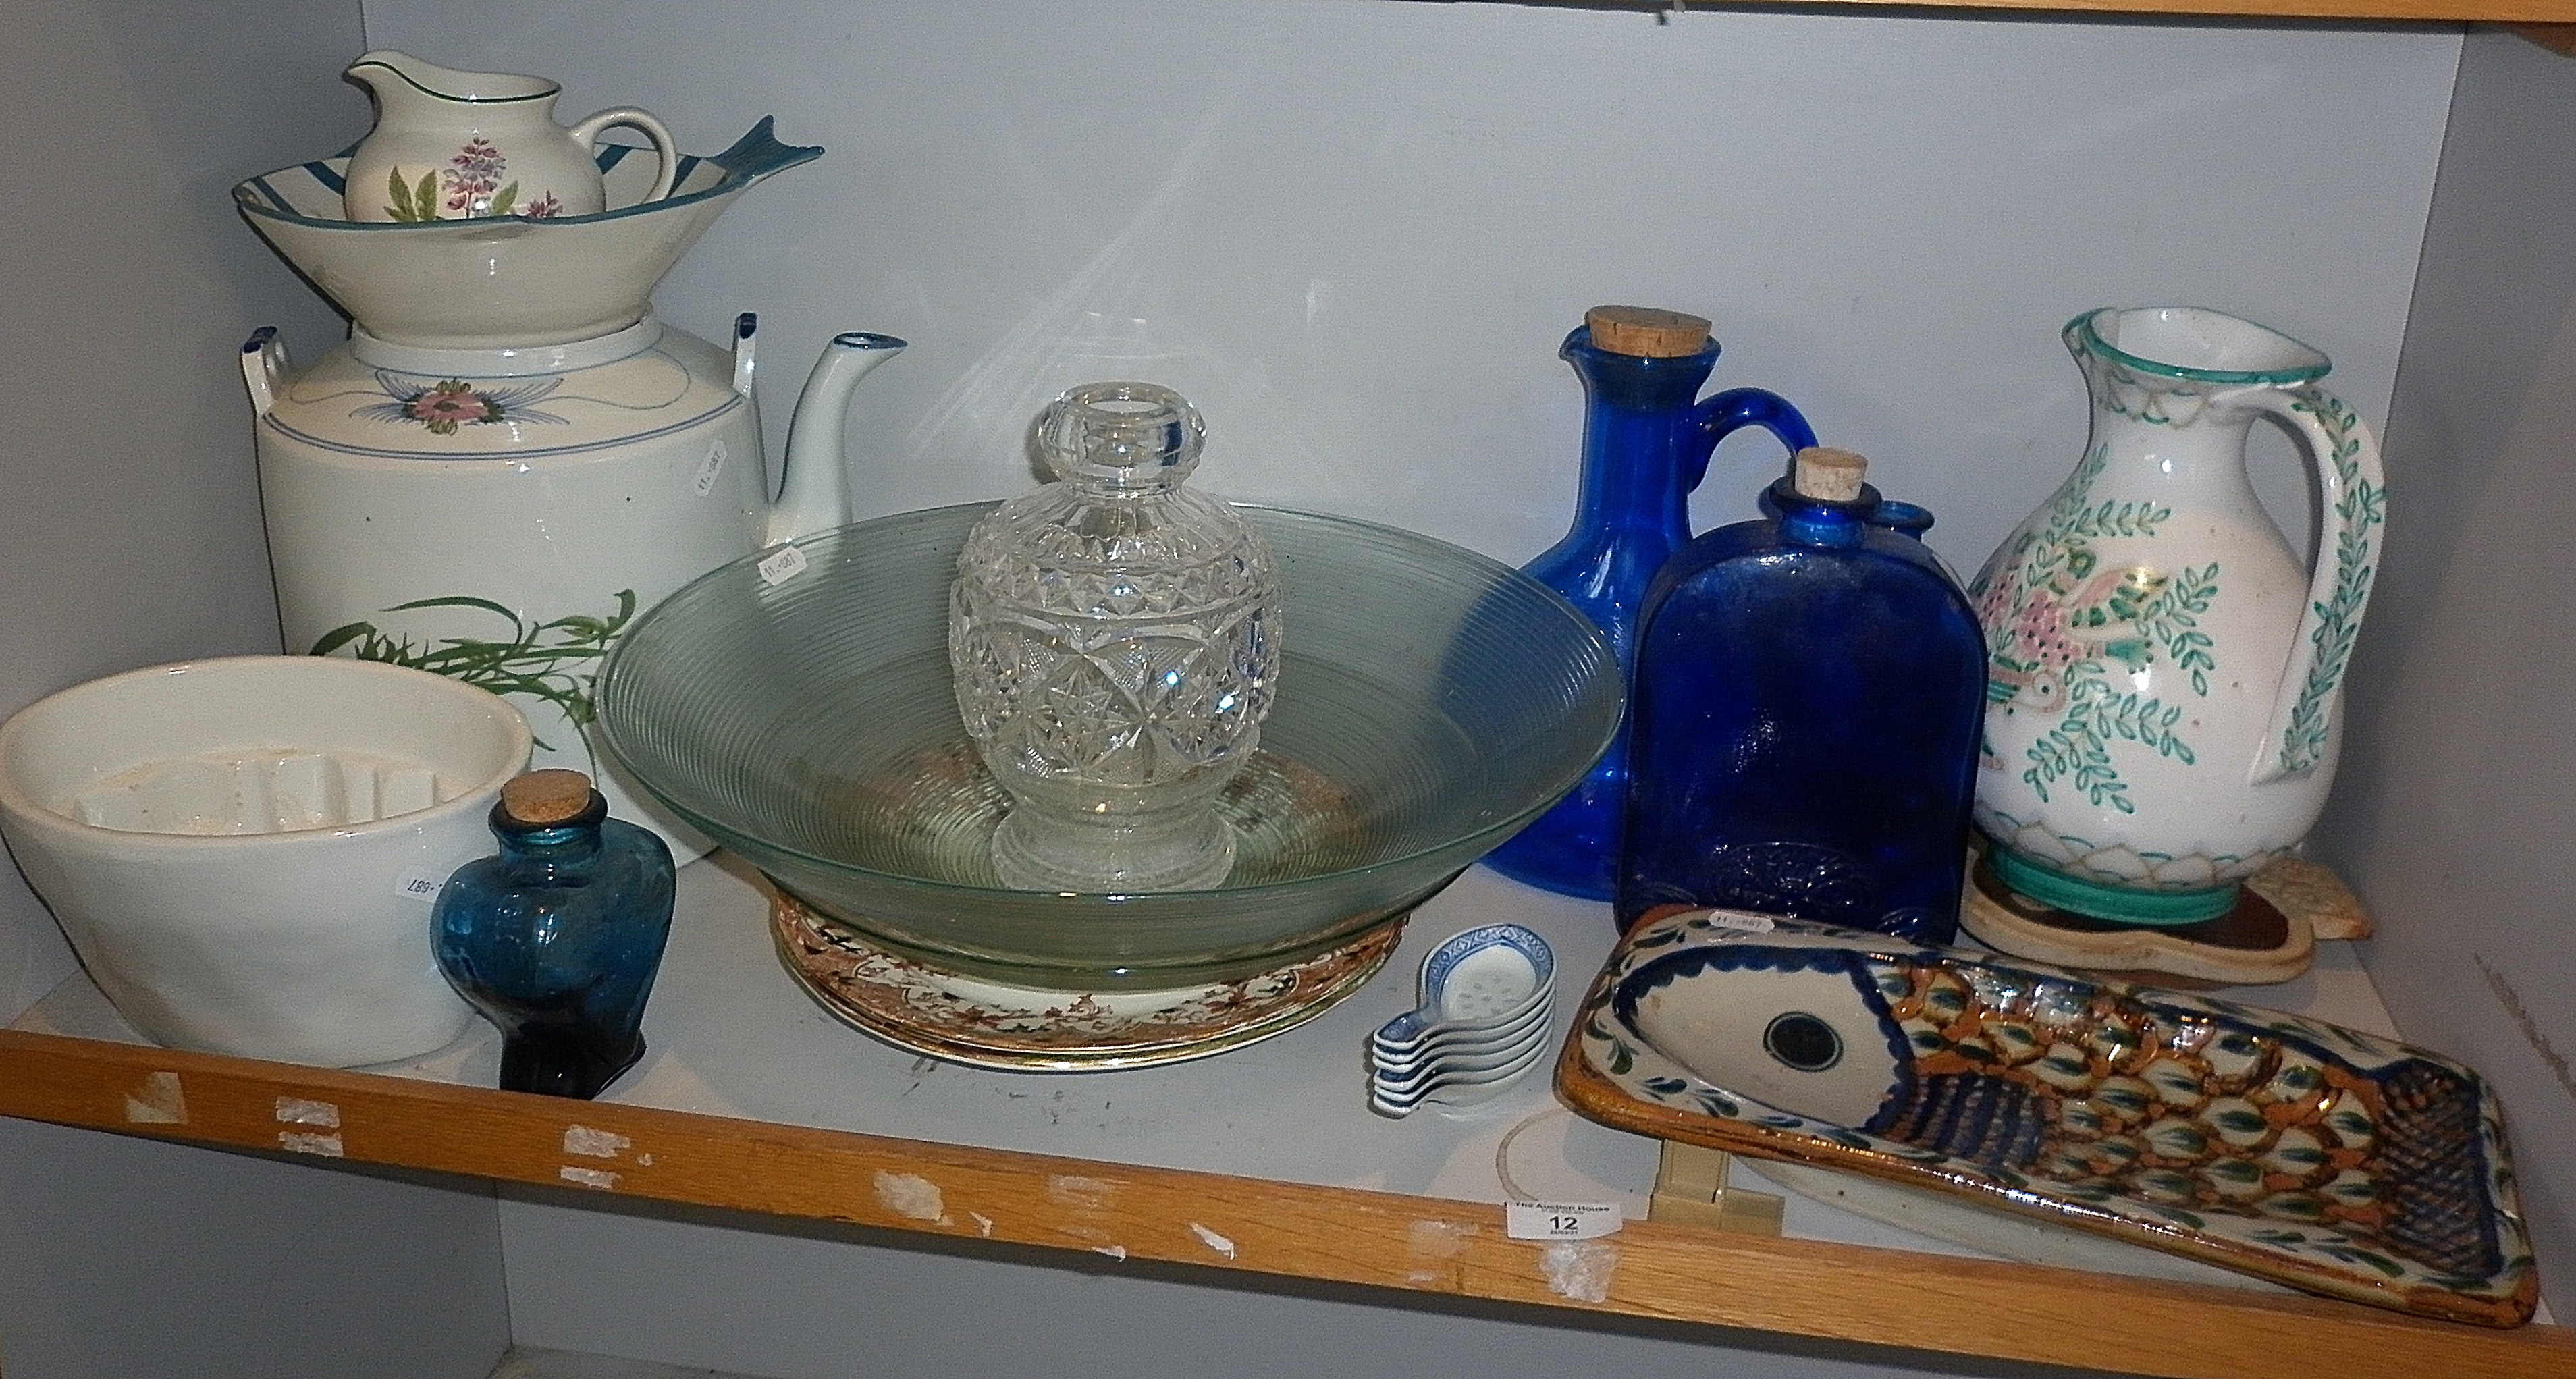 Assorted pottery and glass including large glass salad bowl